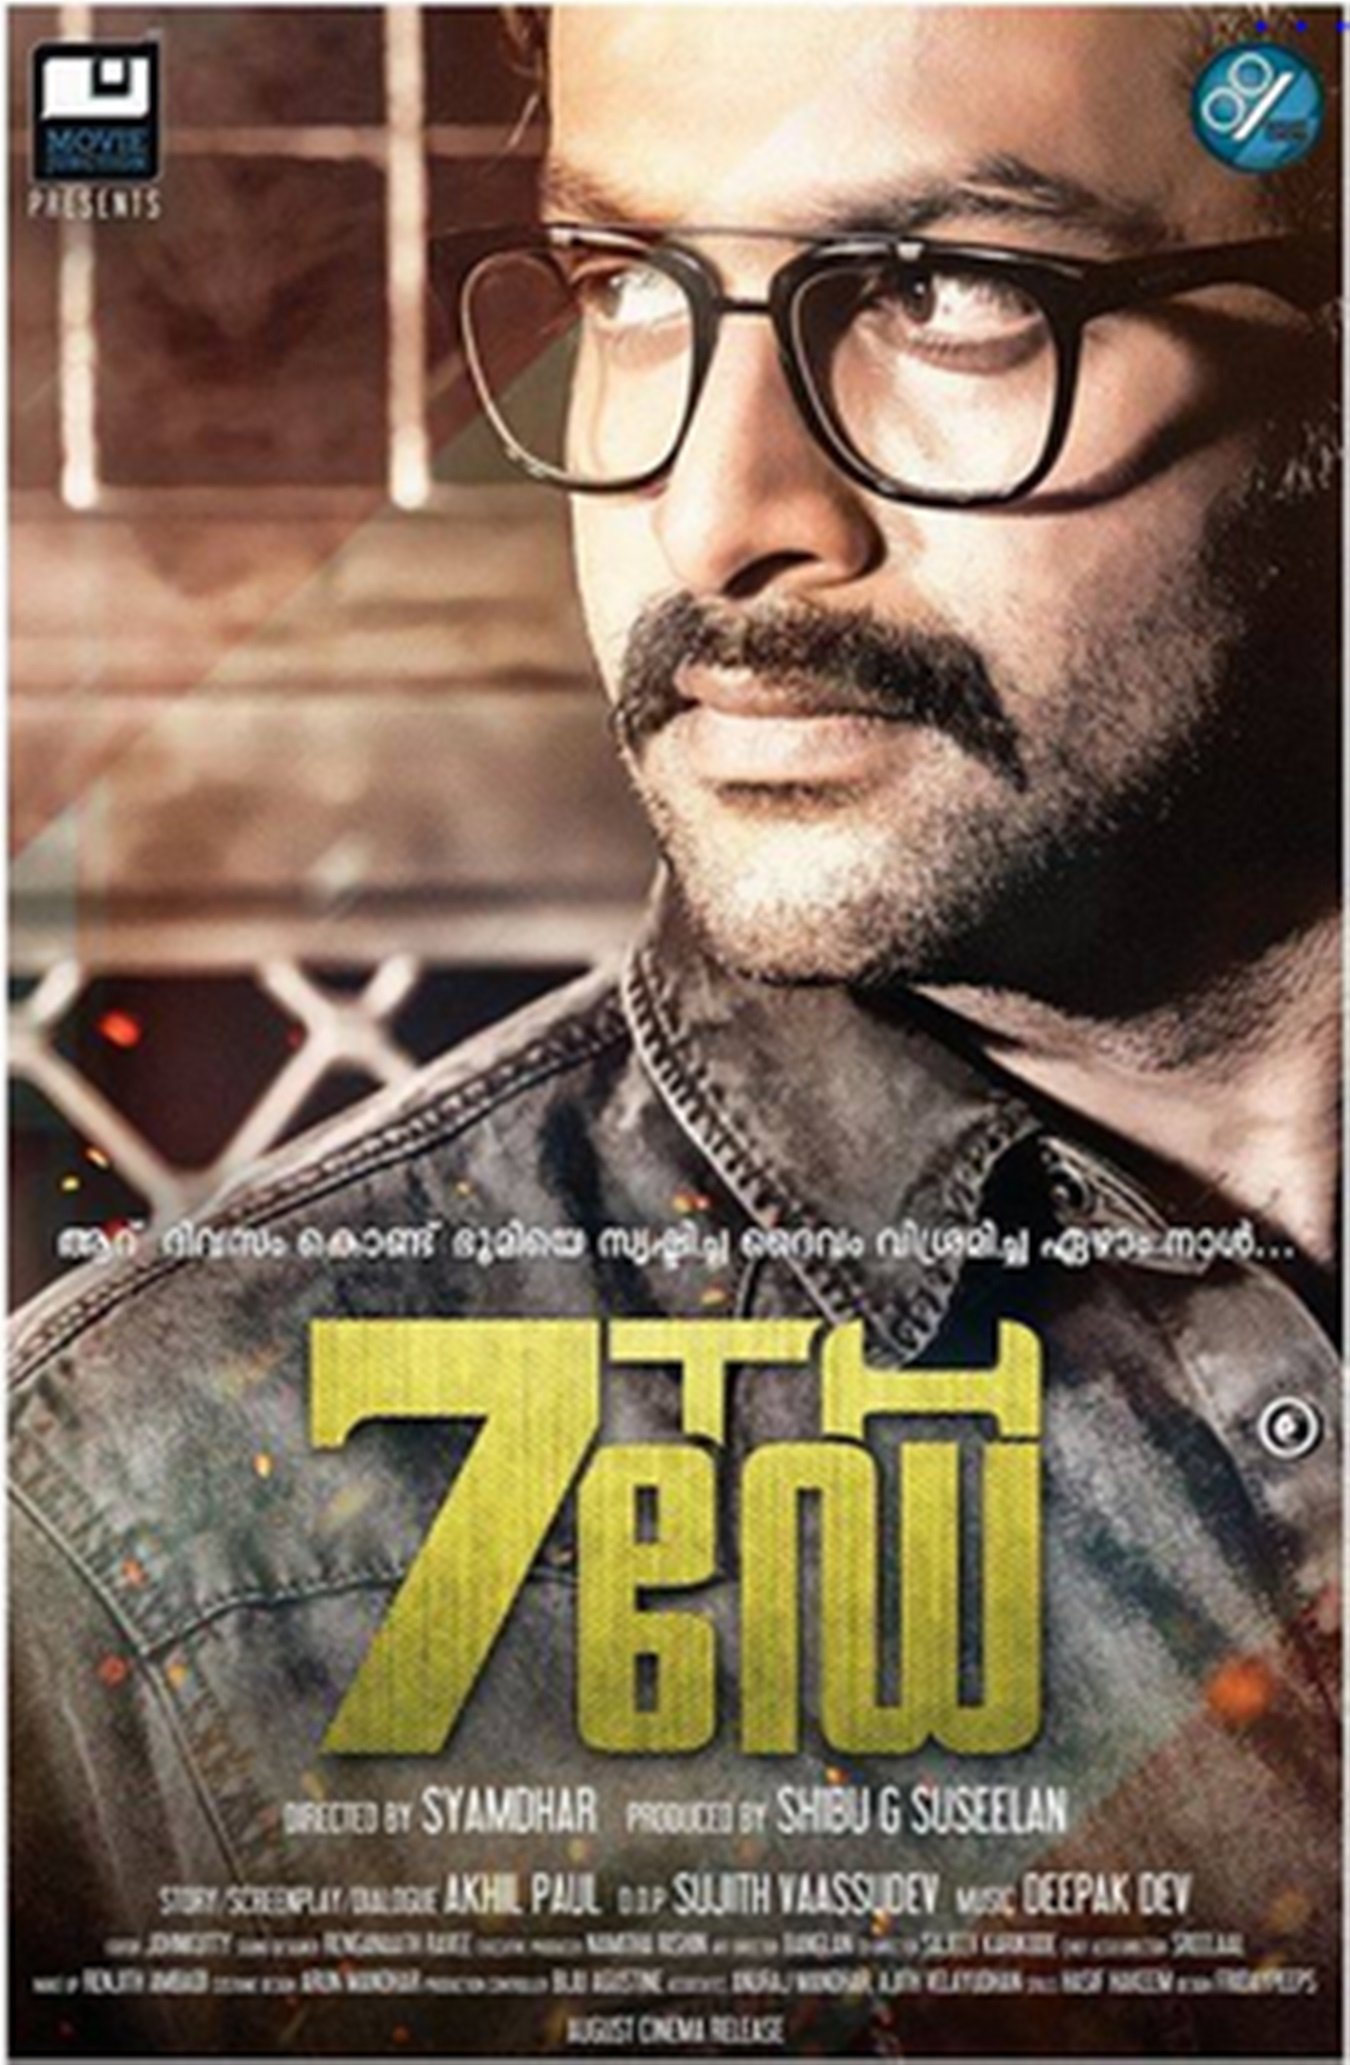 7th Day Movie Poster